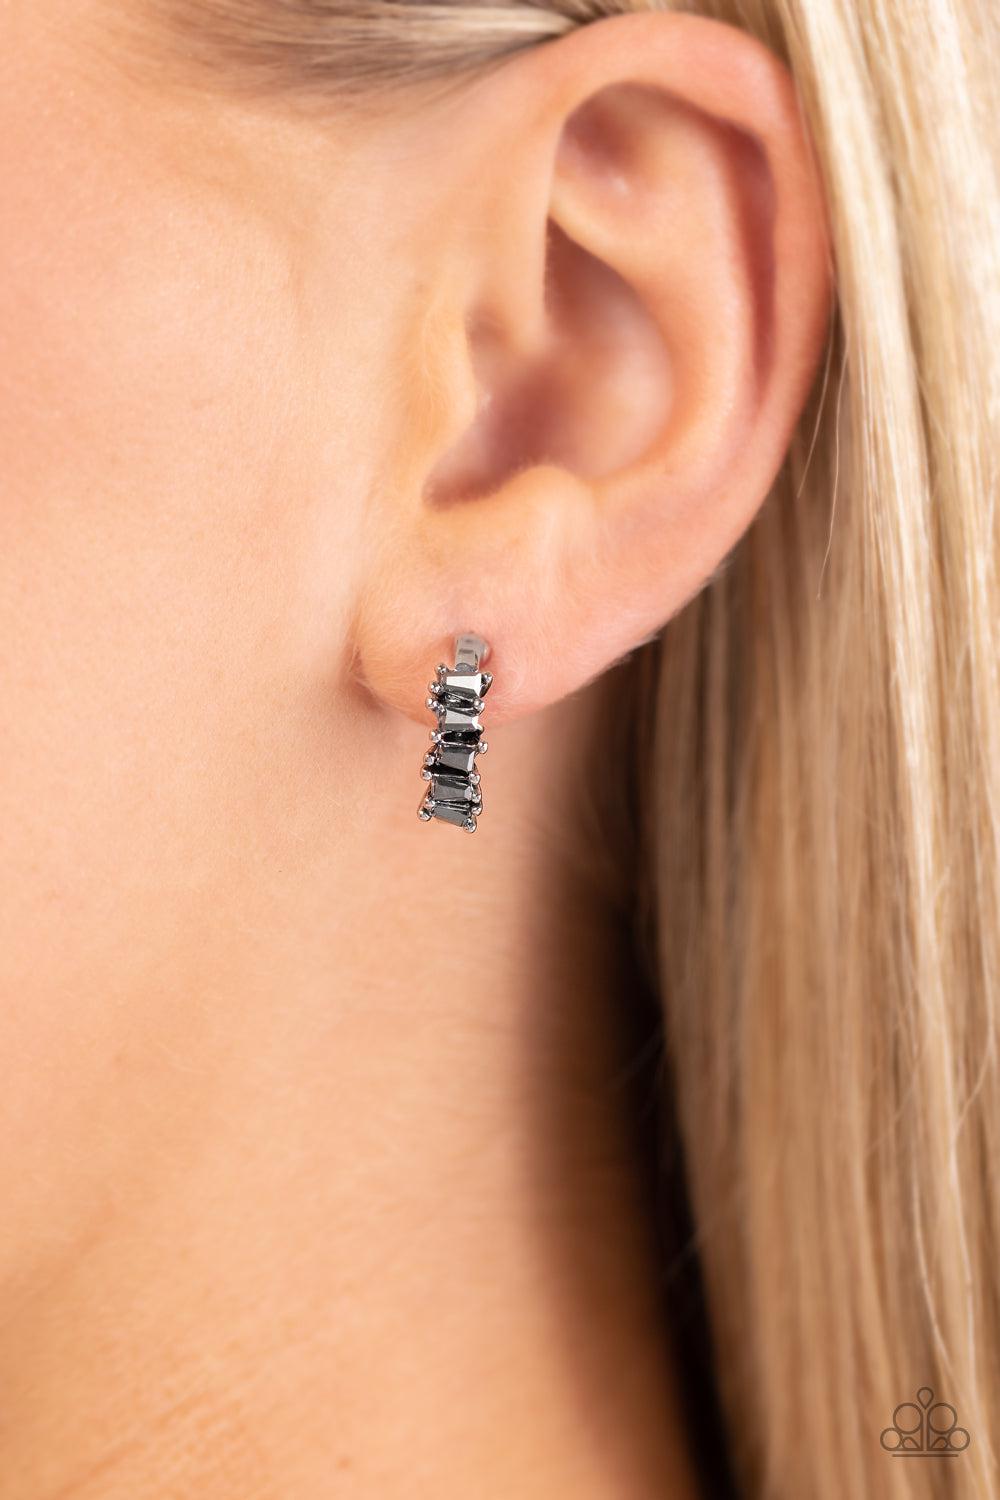 Rugged Rockstar Silver Hoop Earrings - Paparazzi Accessories-on model - CarasShop.com - $5 Jewelry by Cara Jewels